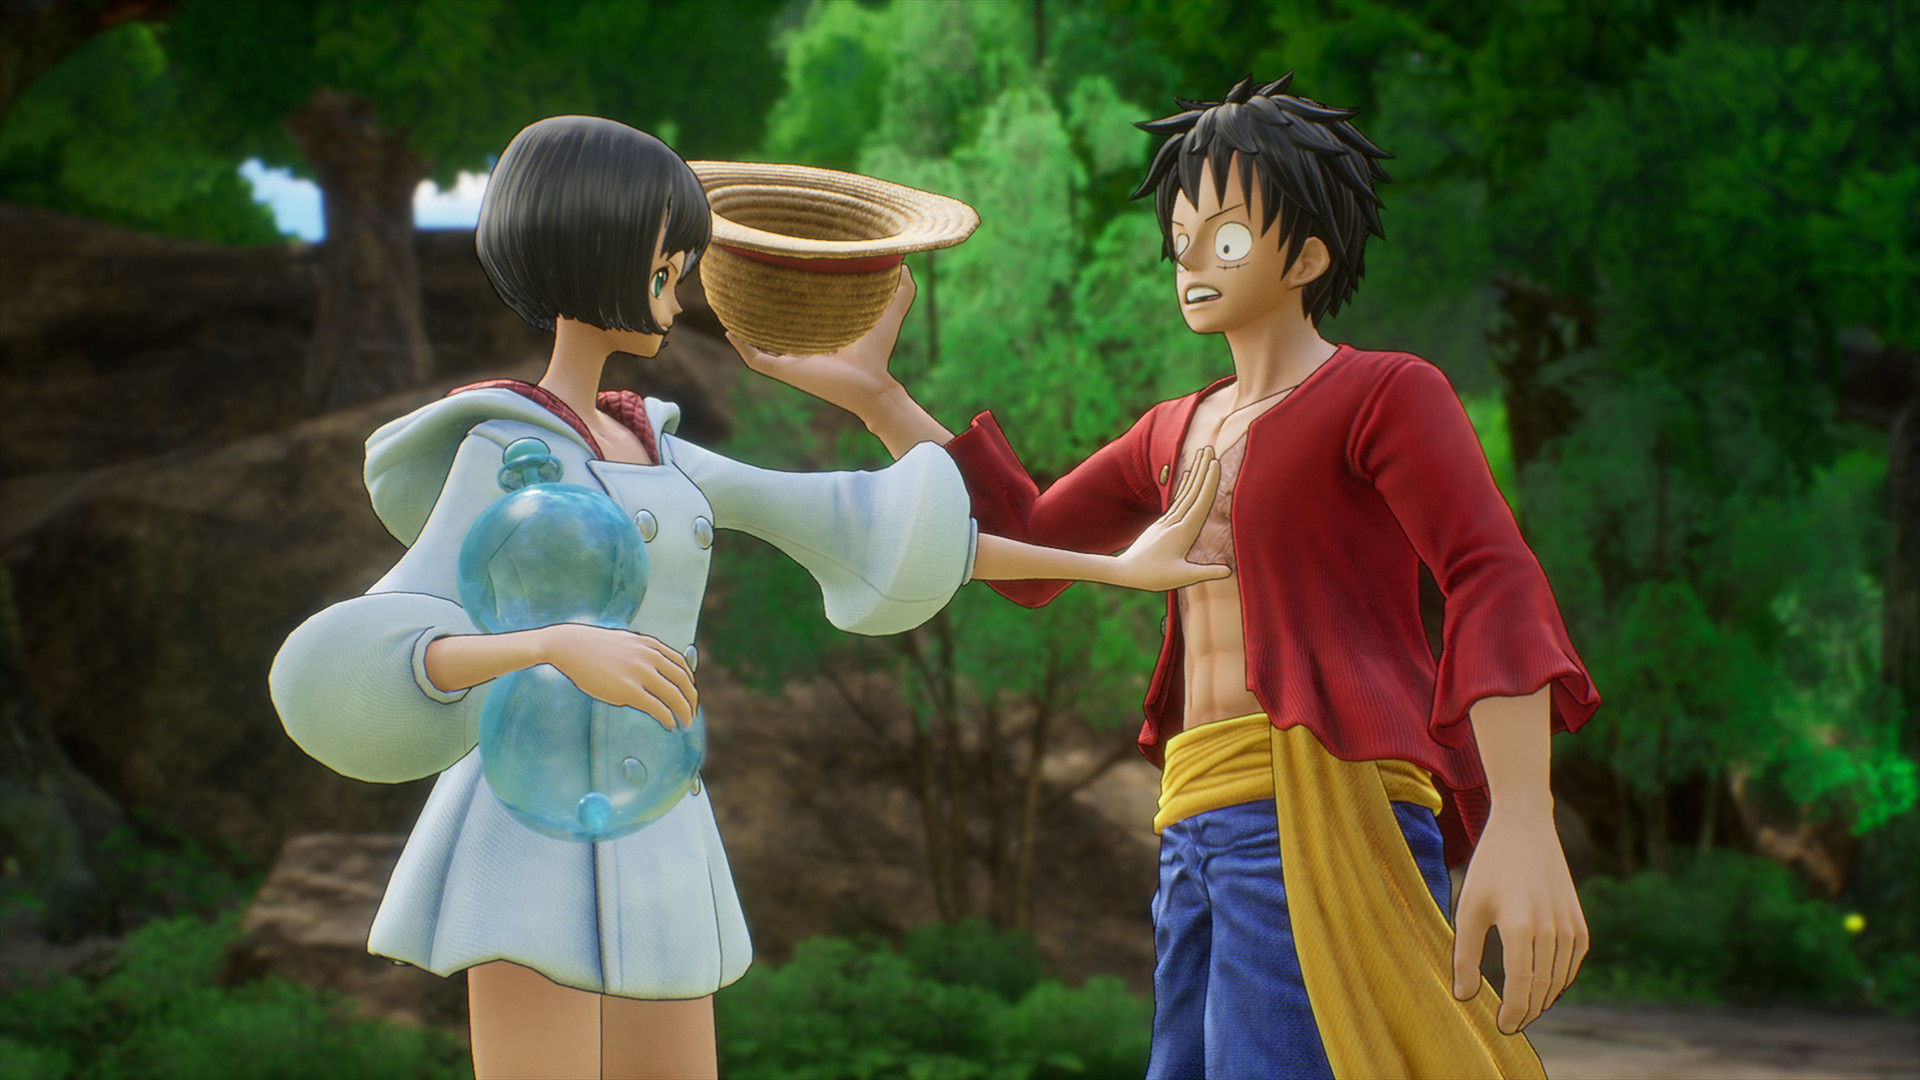 One Piece Odyssey: 5 turn-based JRPG games to try out before One